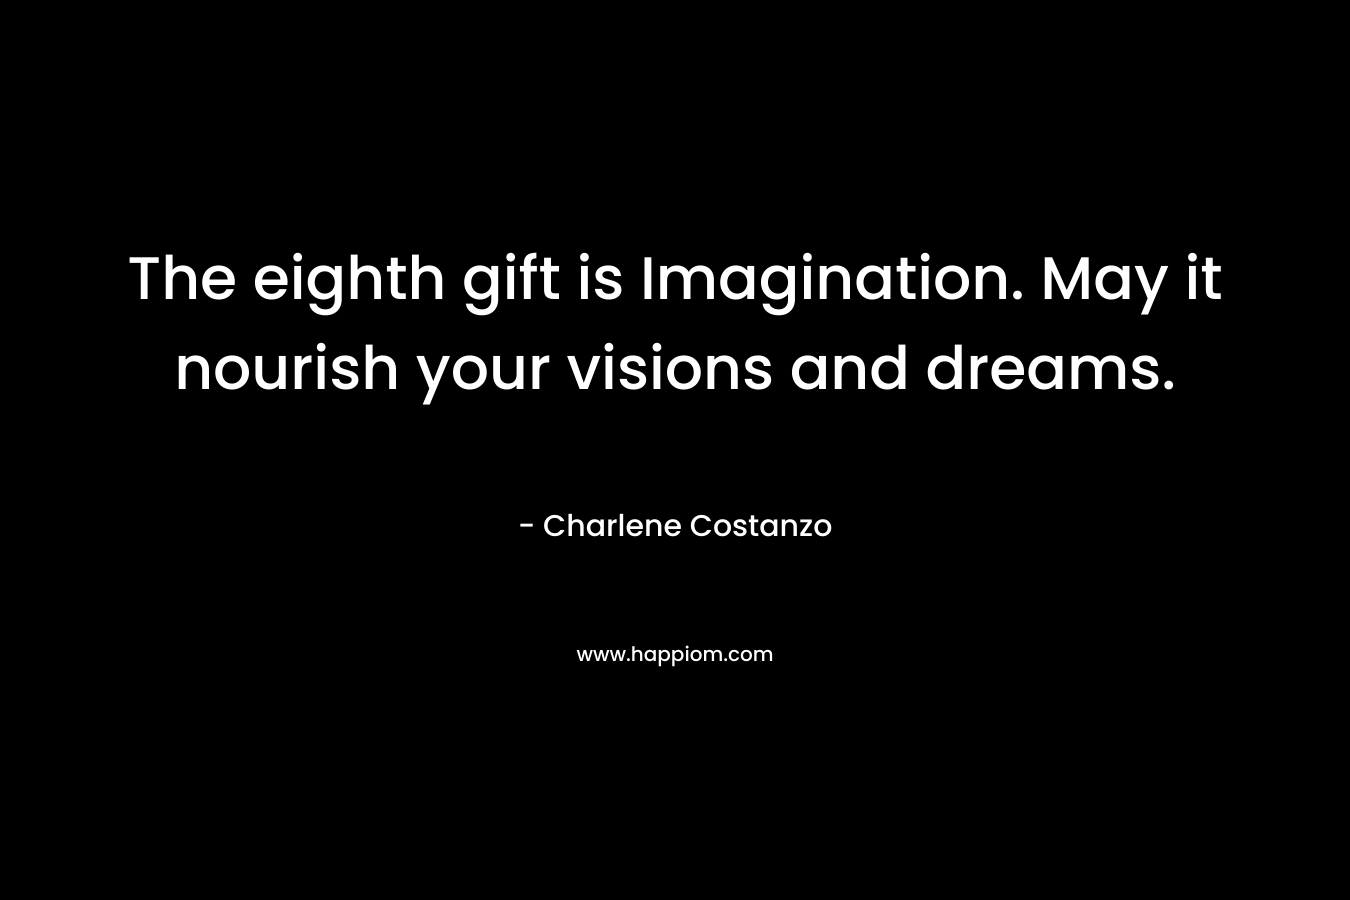 The eighth gift is Imagination. May it nourish your visions and dreams. – Charlene Costanzo